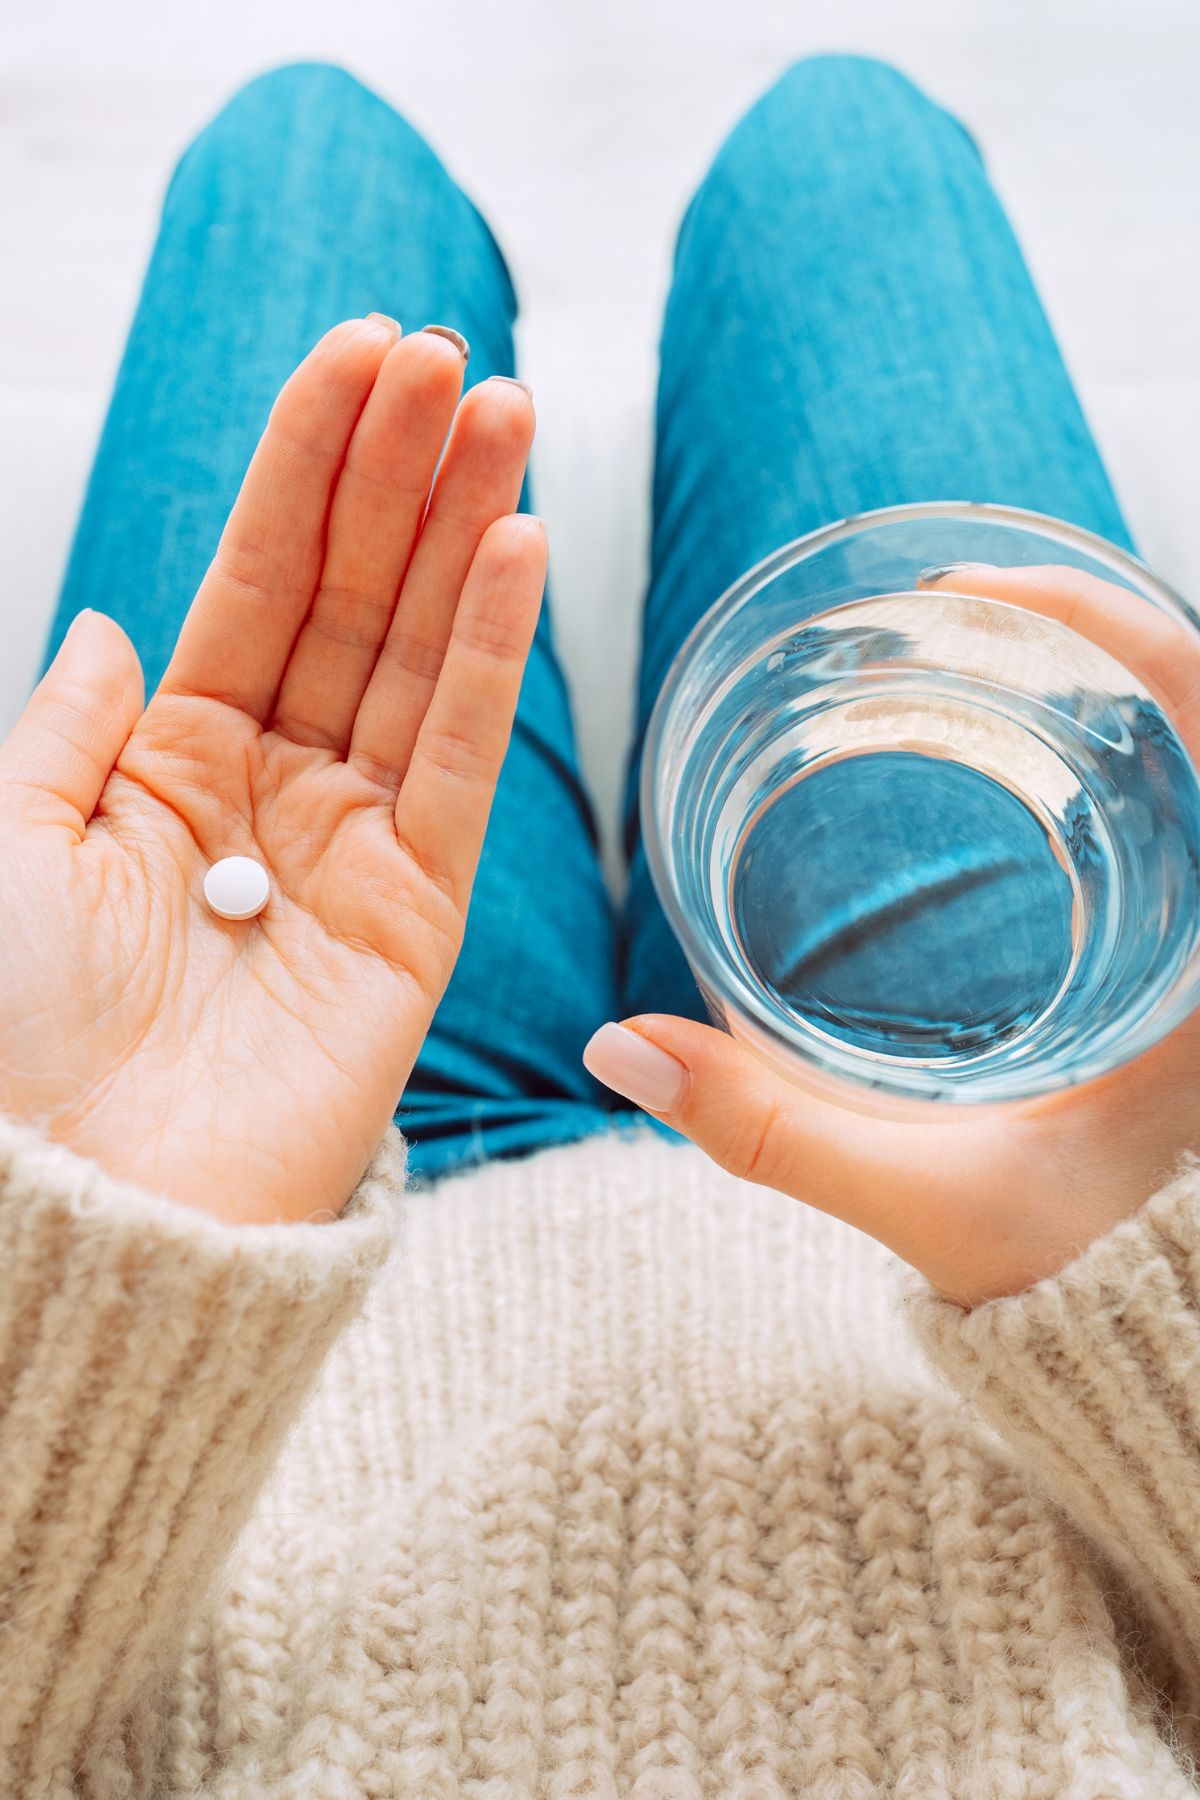 A woman holds a Midol pill in one hand and a glass of water in the other.